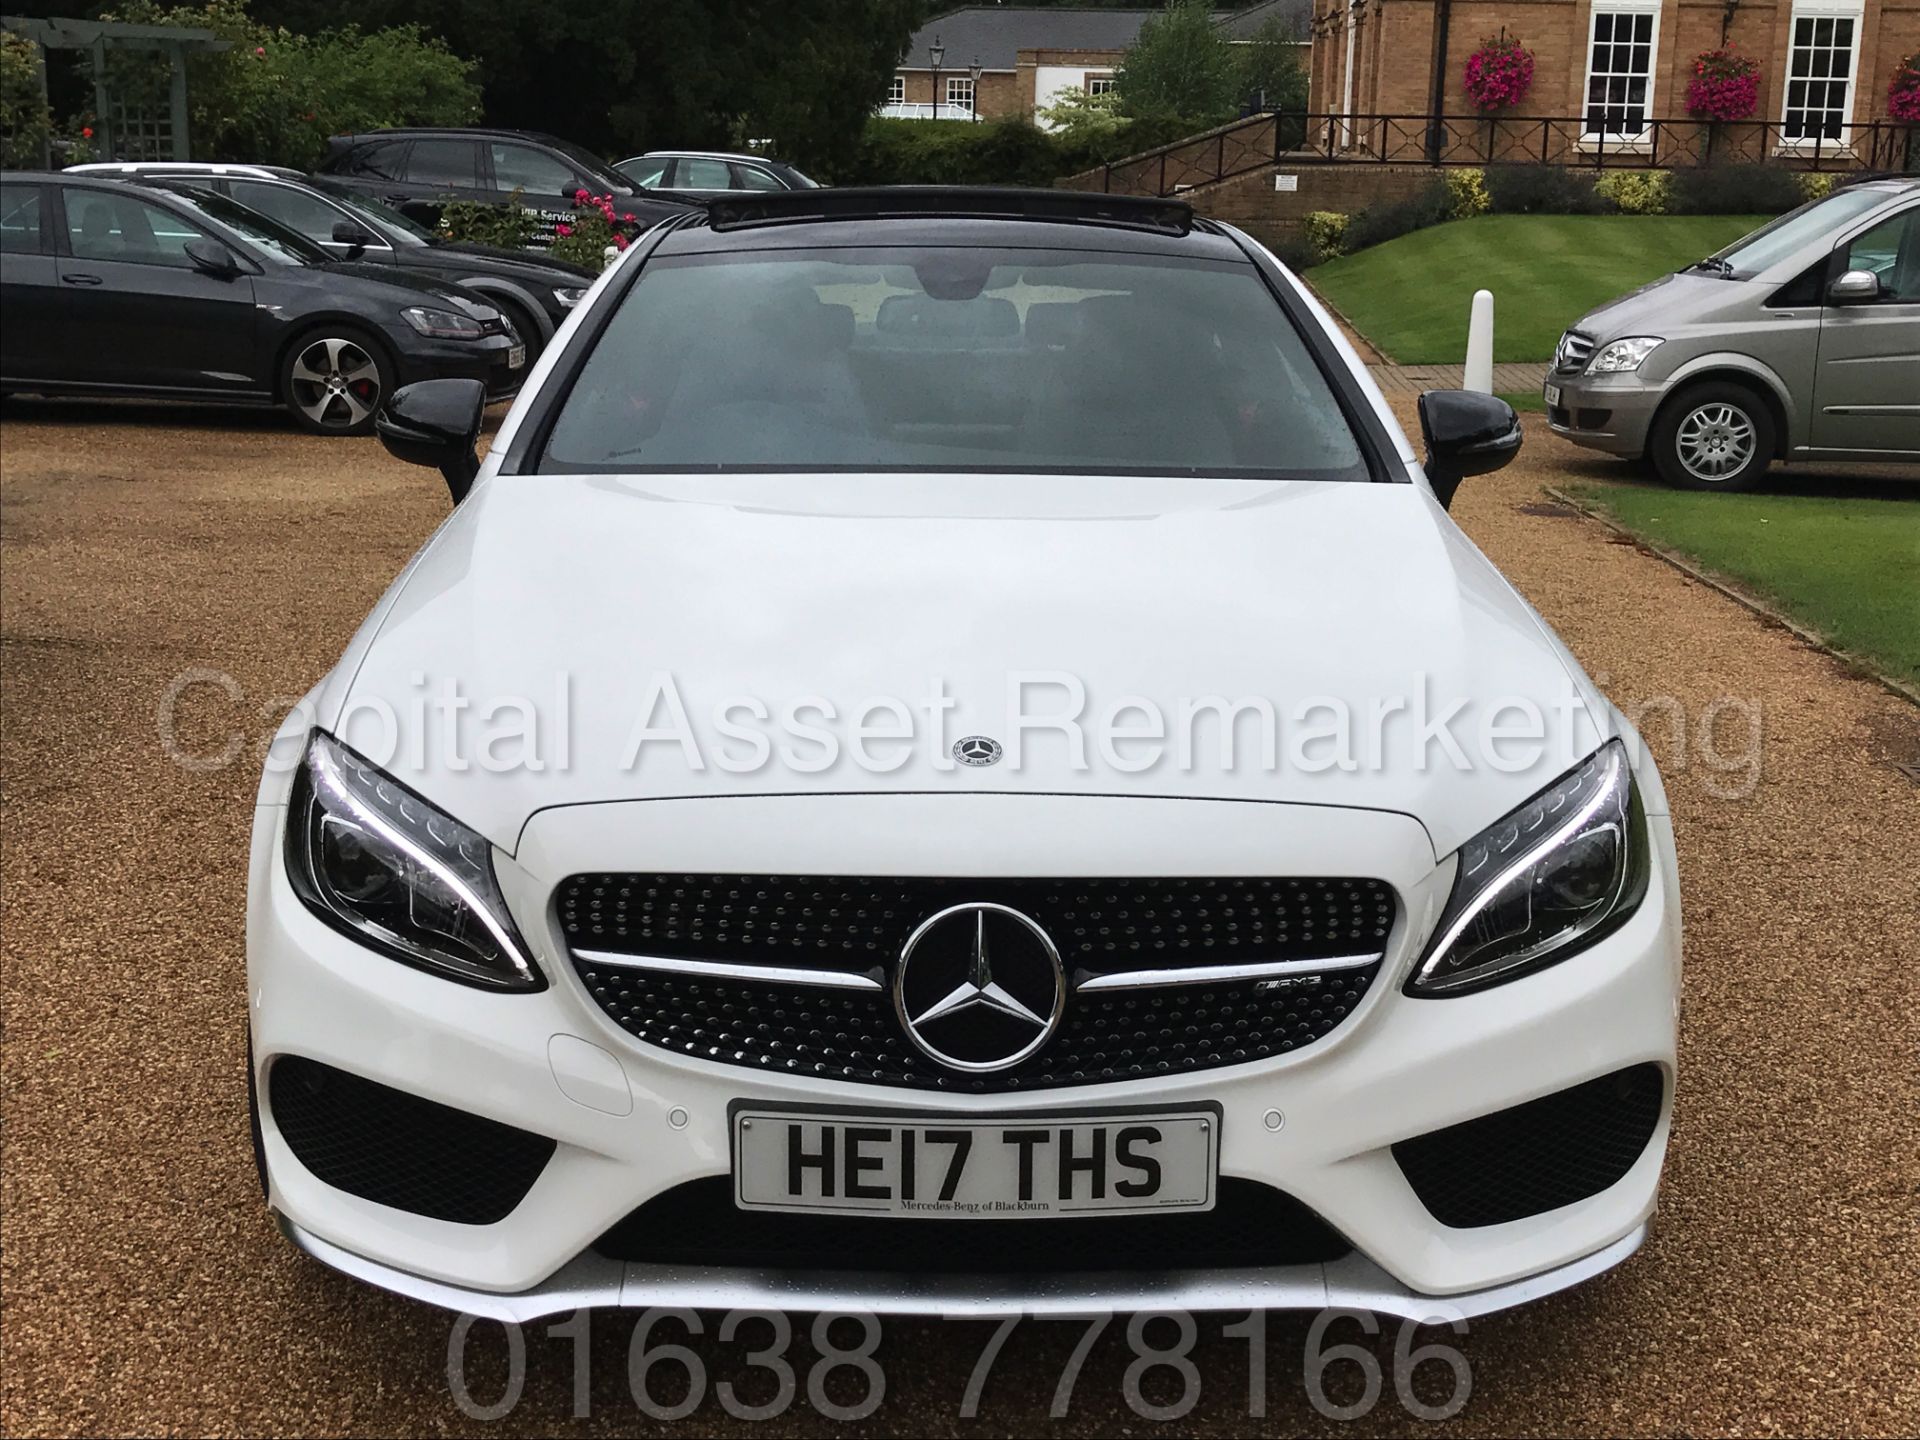 MEREDES-BENZ C43 AMG PREMIUM '4 MATIC' COUPE (2017) '9-G AUTO - LEATHER - SAT NAV' **FULLY LOADED** - Image 4 of 57